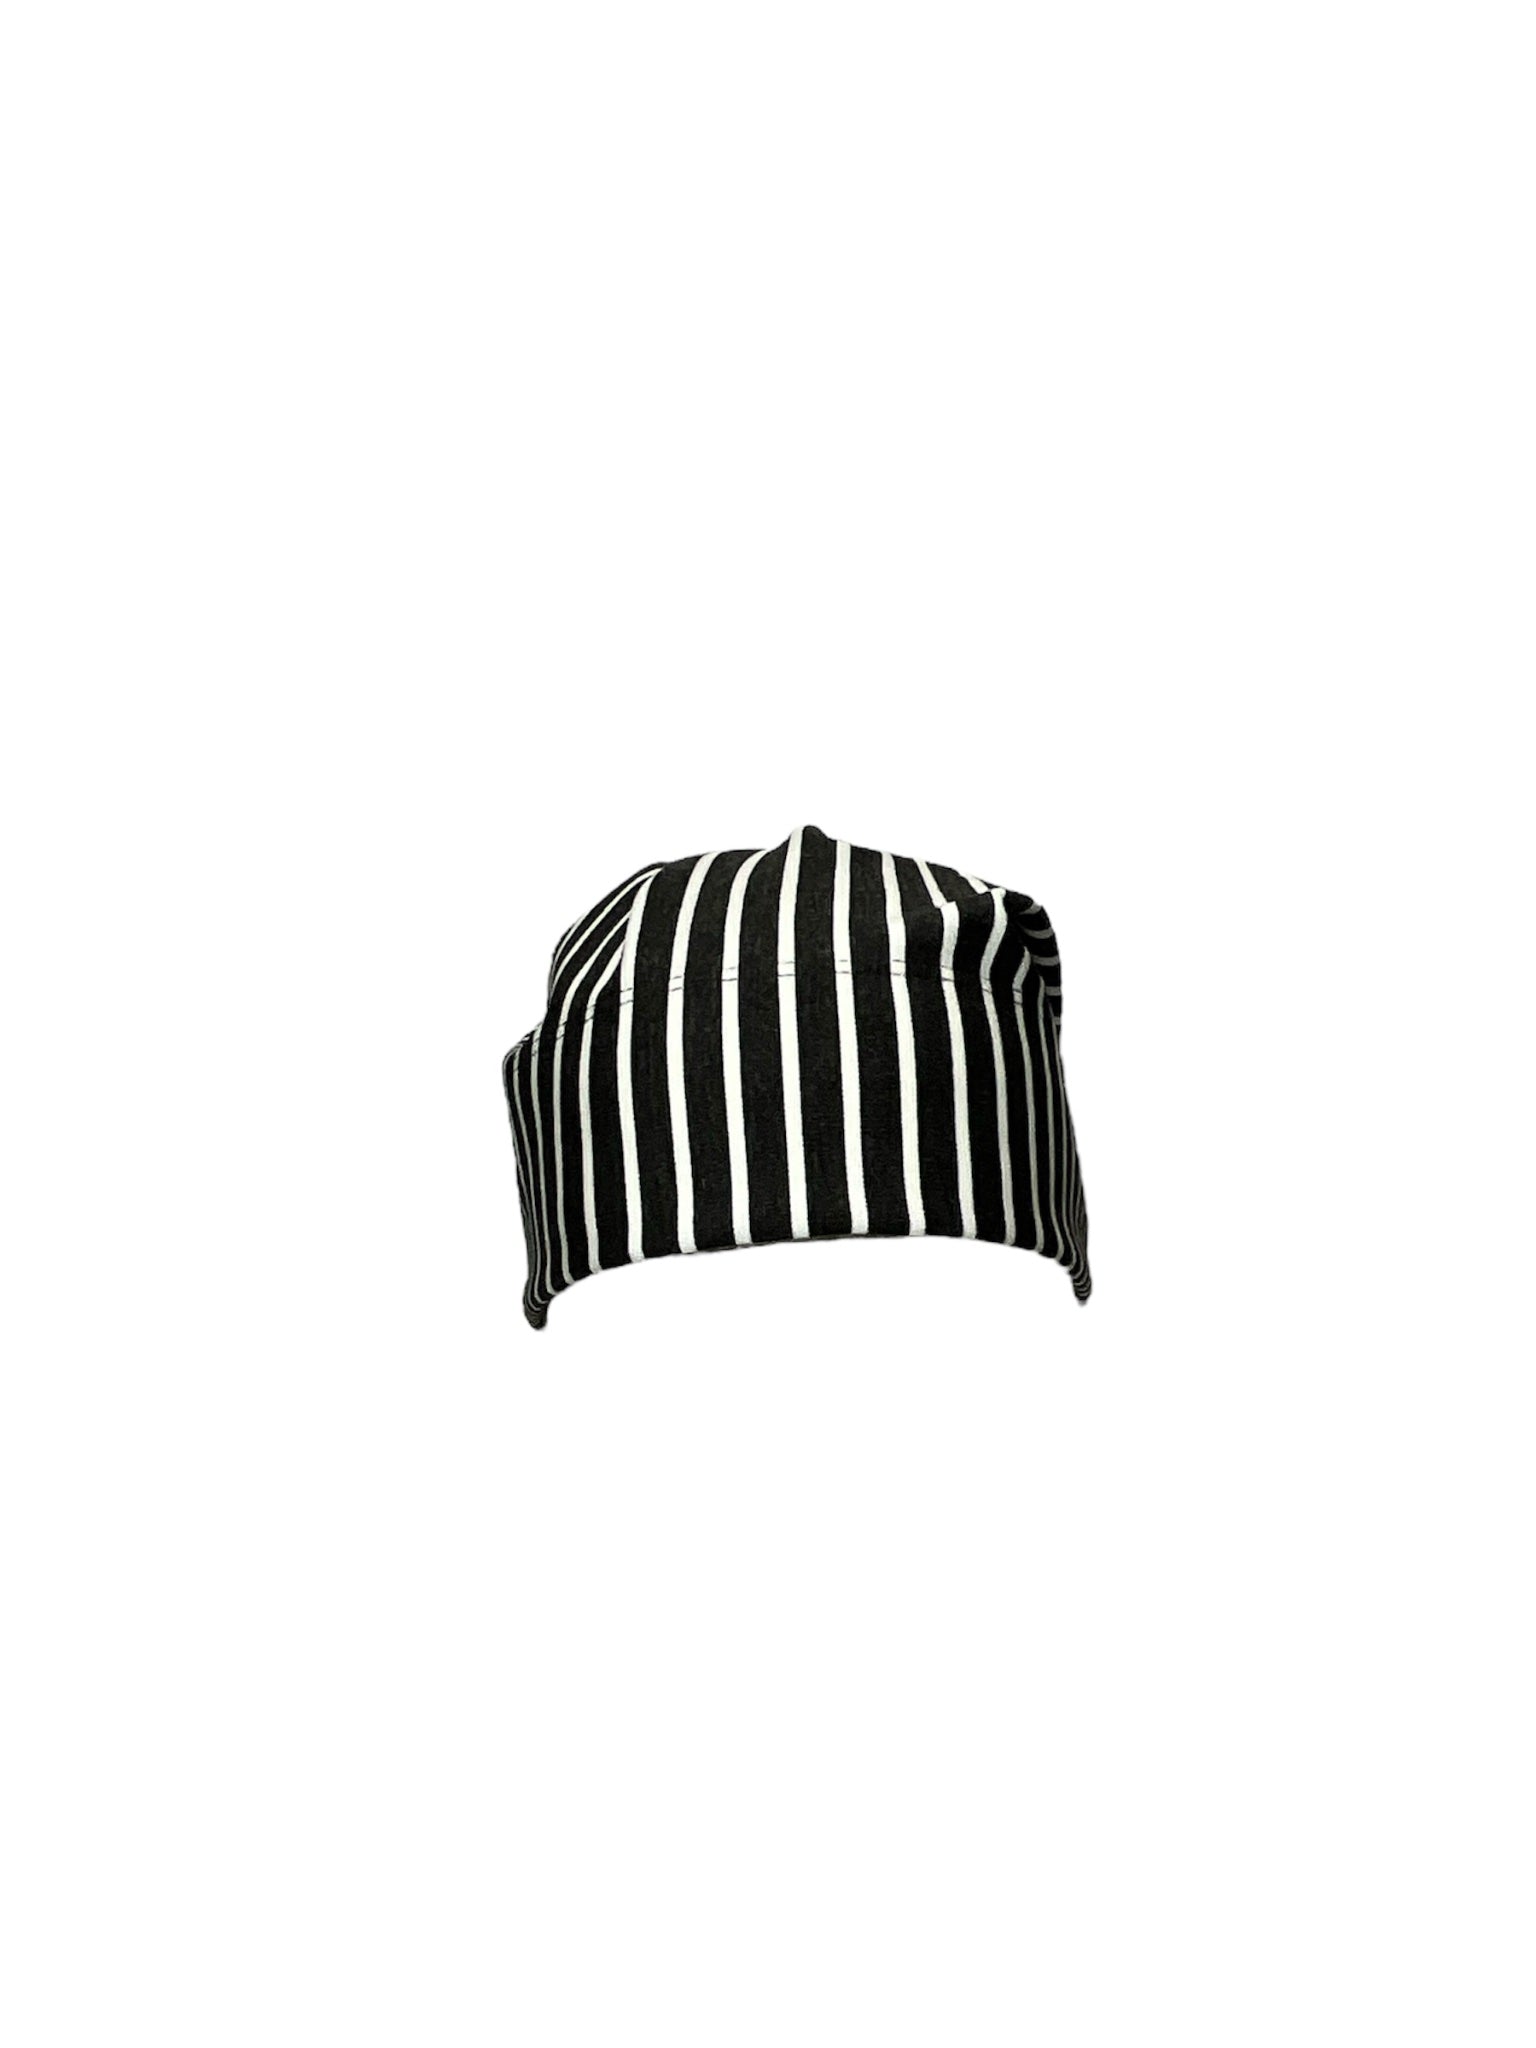 Charcoal/White Vertical Stripes